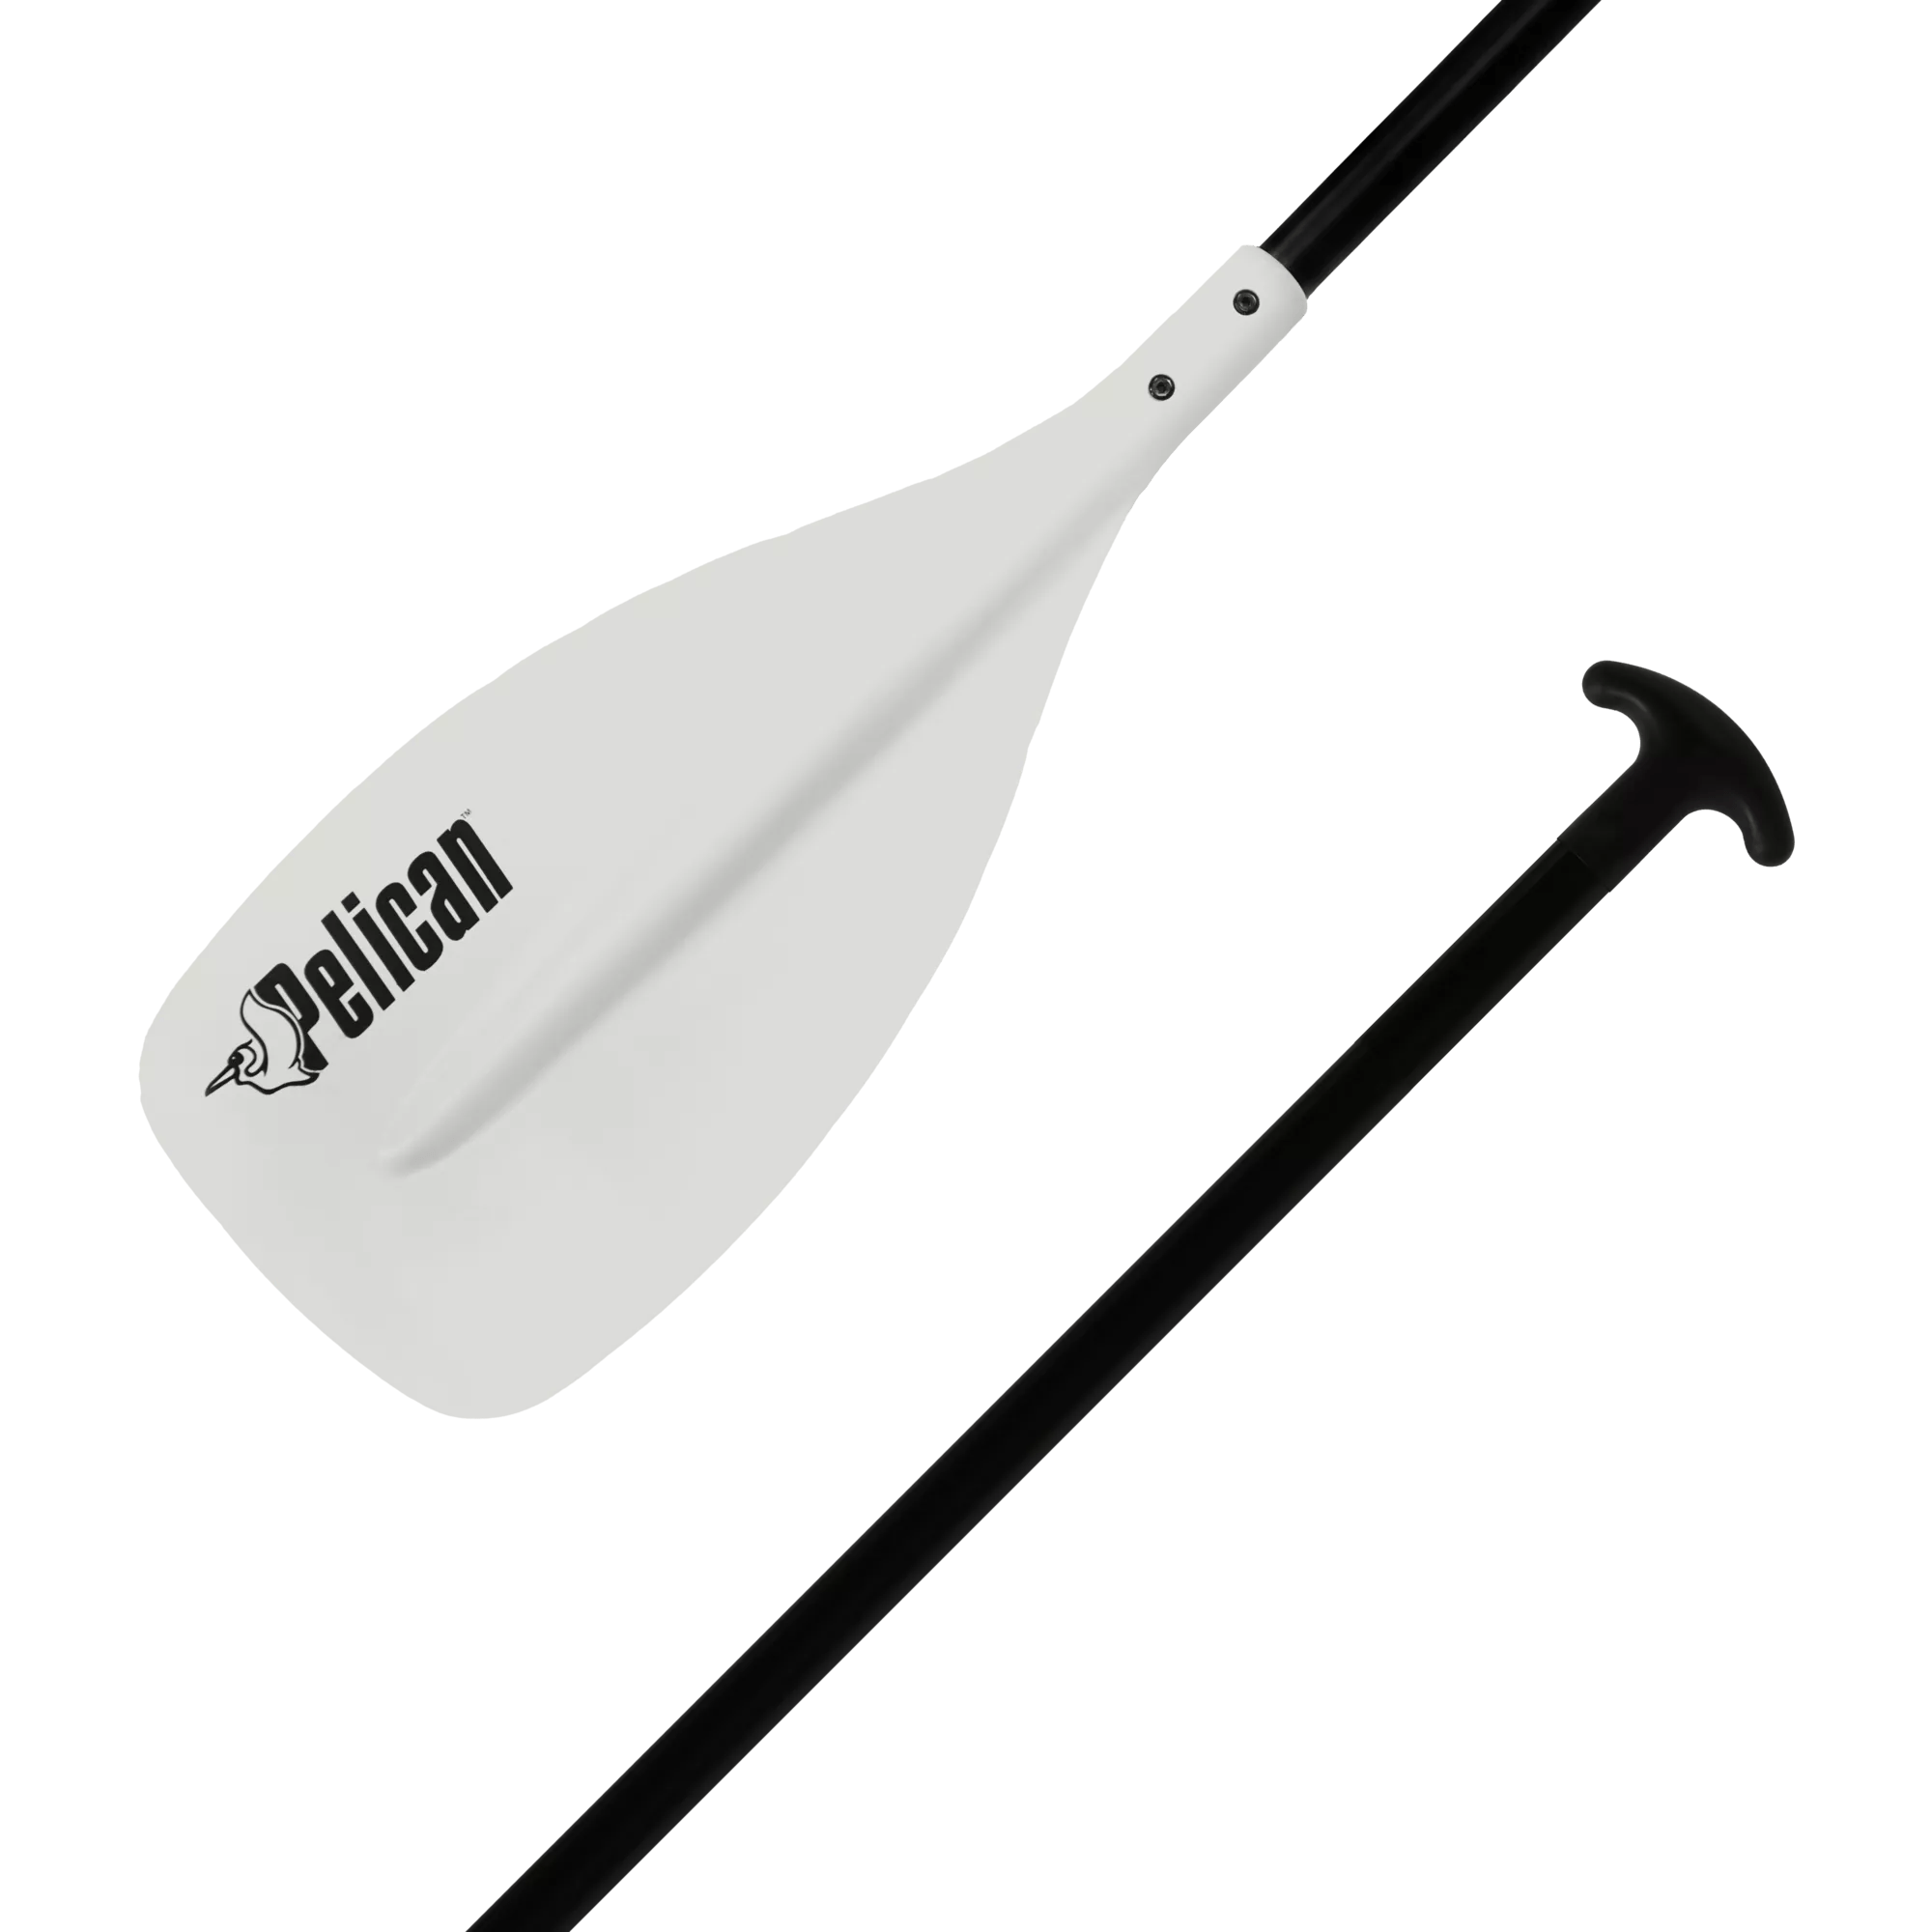 PELICAN - Maelström SUP Paddle 191-201 cm (75”-79”) - White - PS1979-00 - ISO